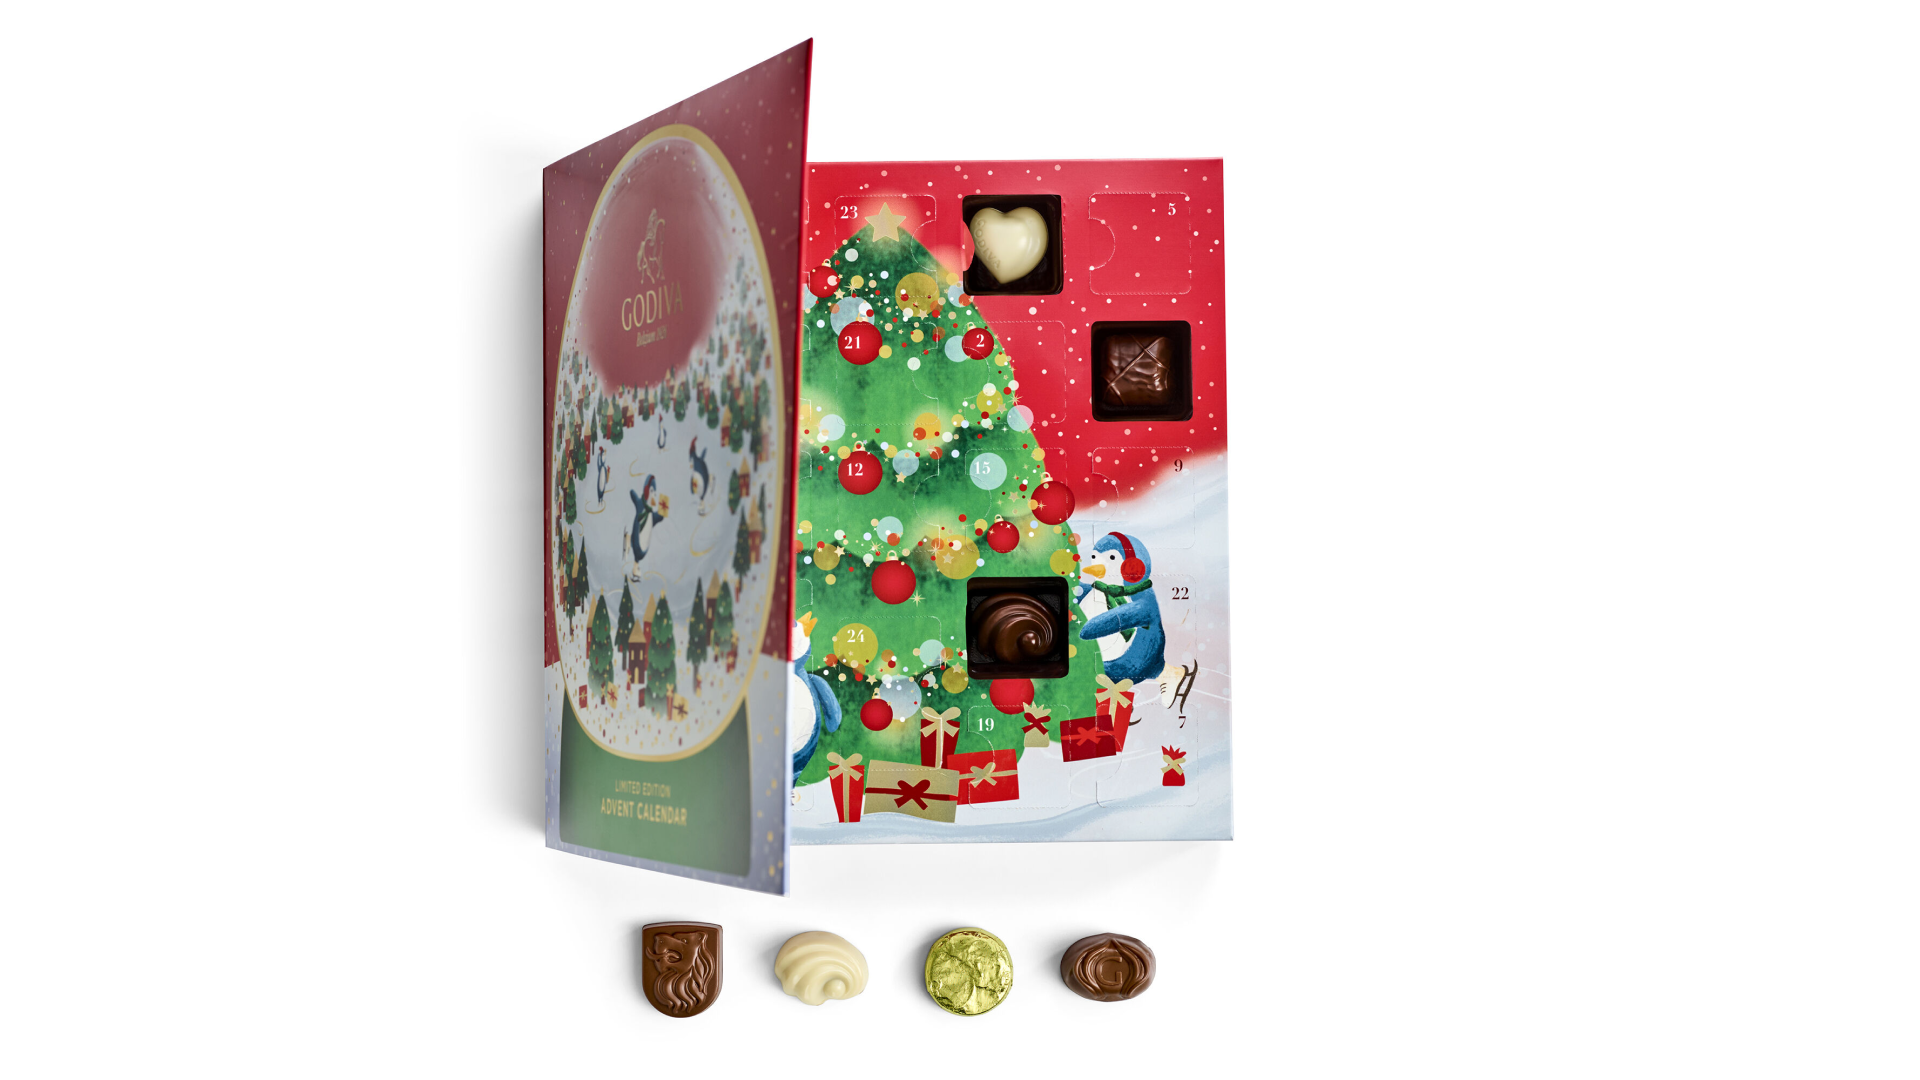 Sephora's Limited Edition Advent Calendar Is the Perfect Gift for Beauty  Fanatics